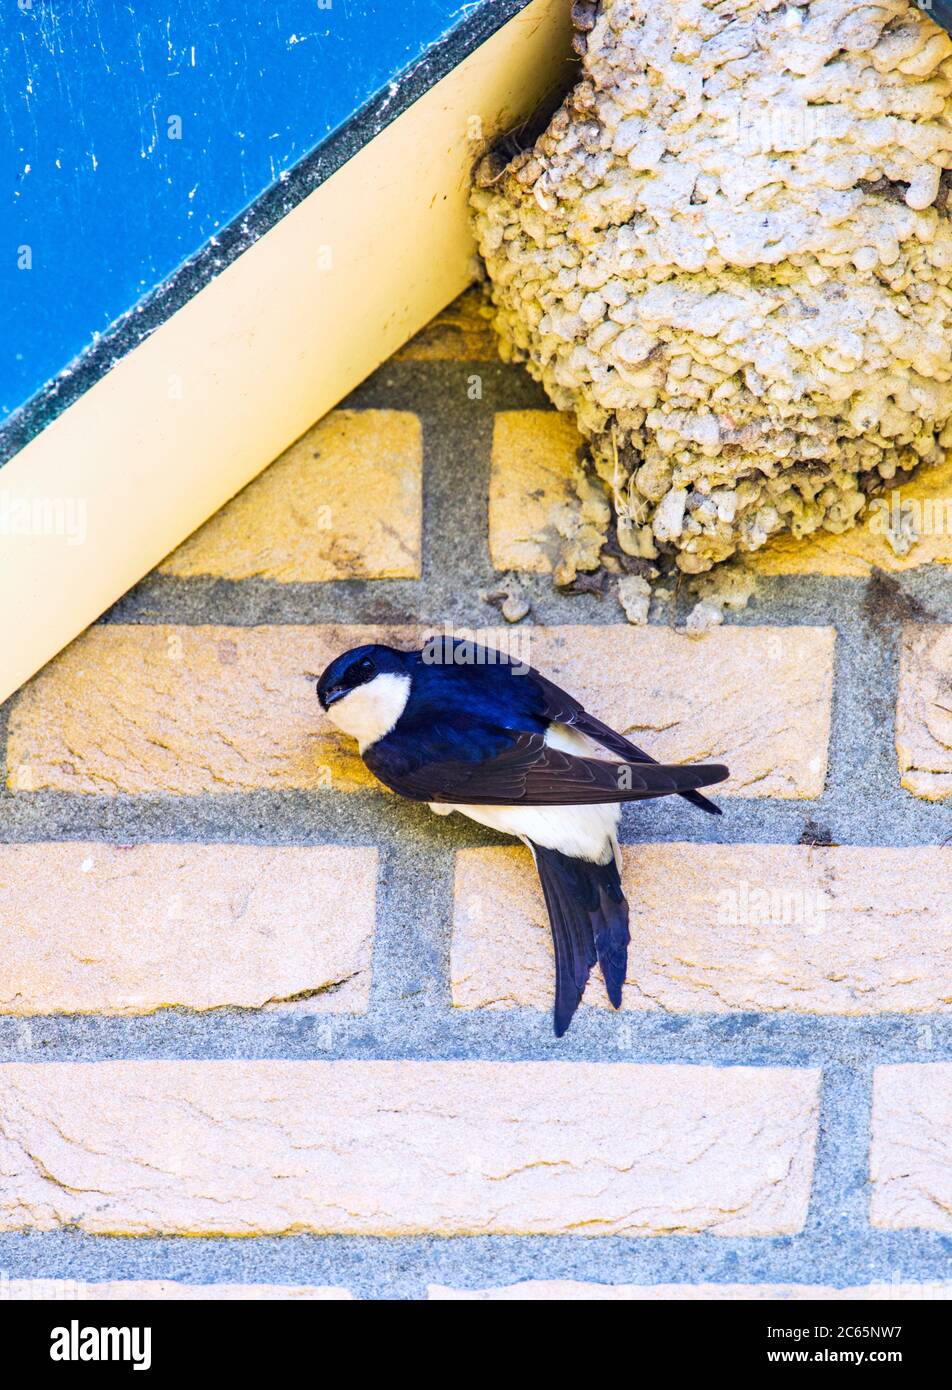 Common House Martin (Delichon urbica) clinging to wall of a house near its nest in an urban area in Friesland, Netherlands. Looking around alert. Stock Photo